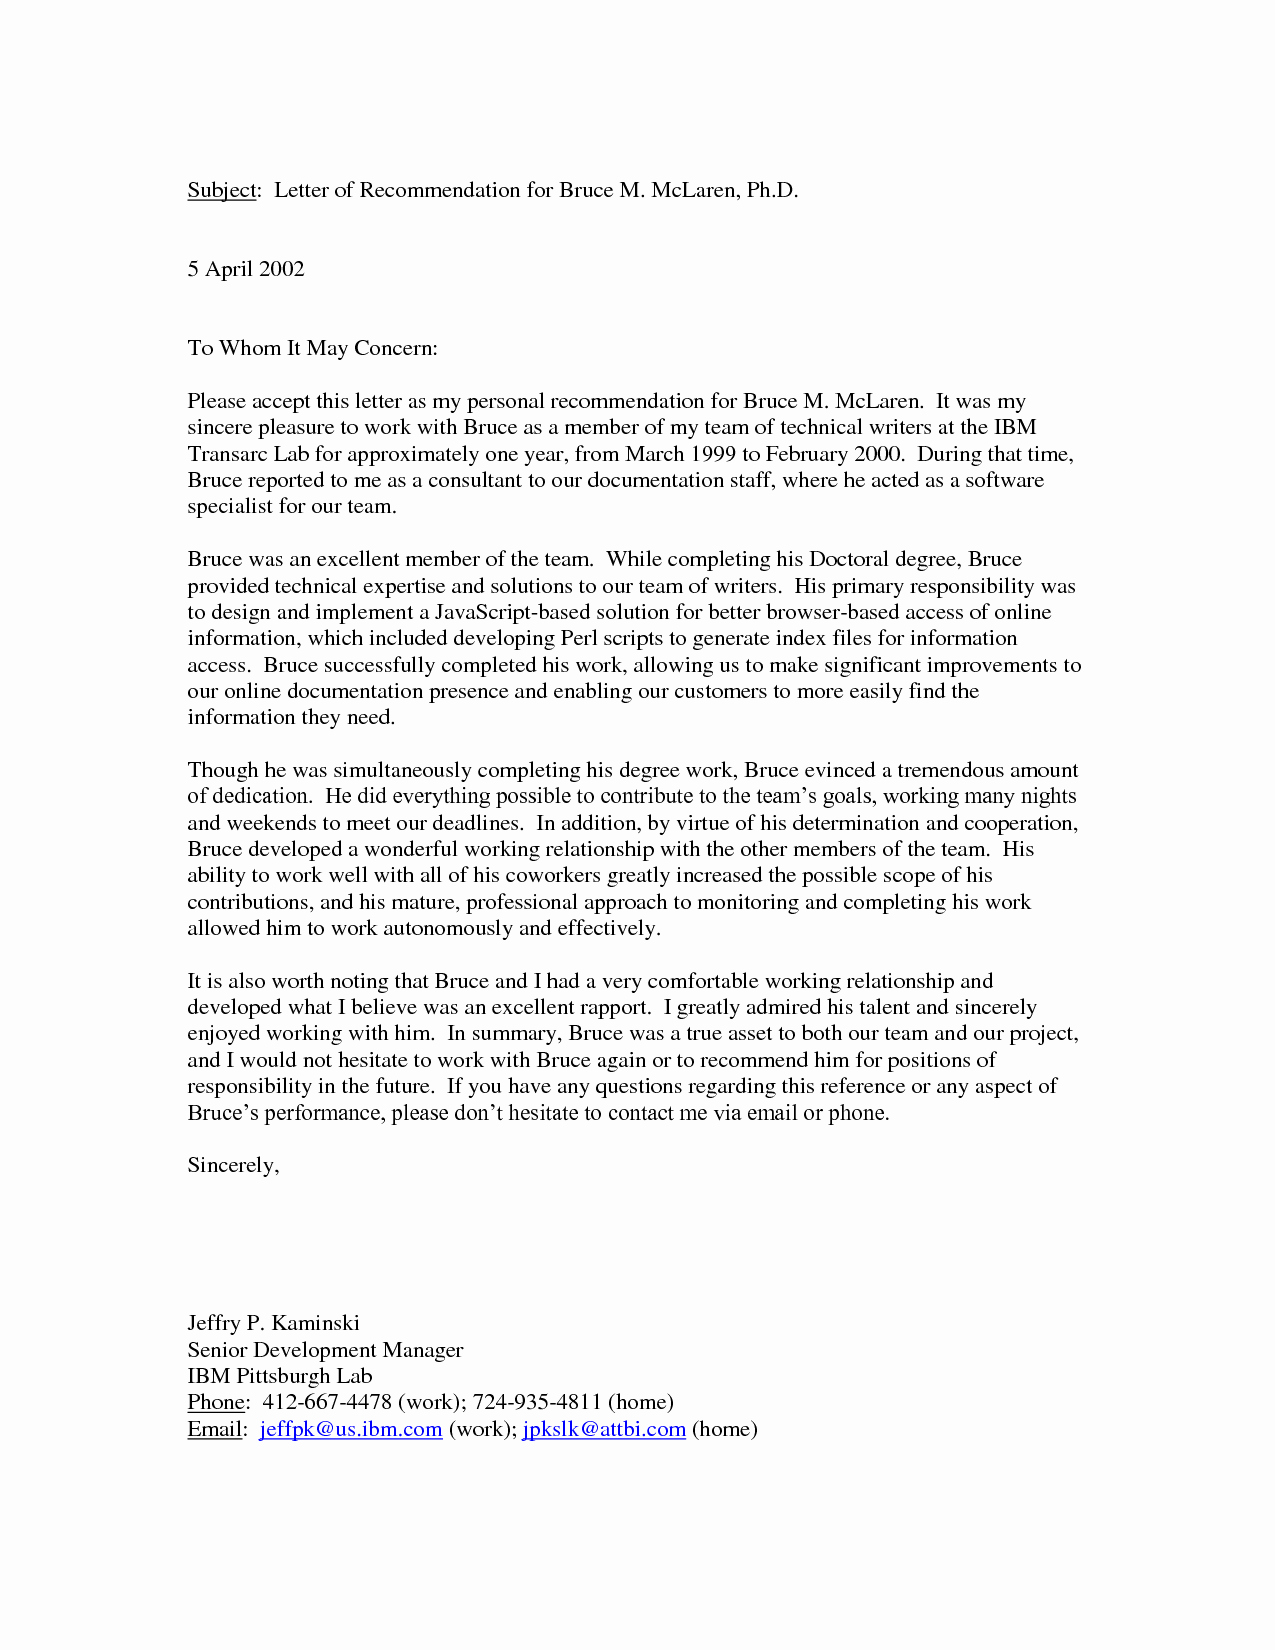 Personal Recommendation Letter Sample New Personal Letter Re Mendation